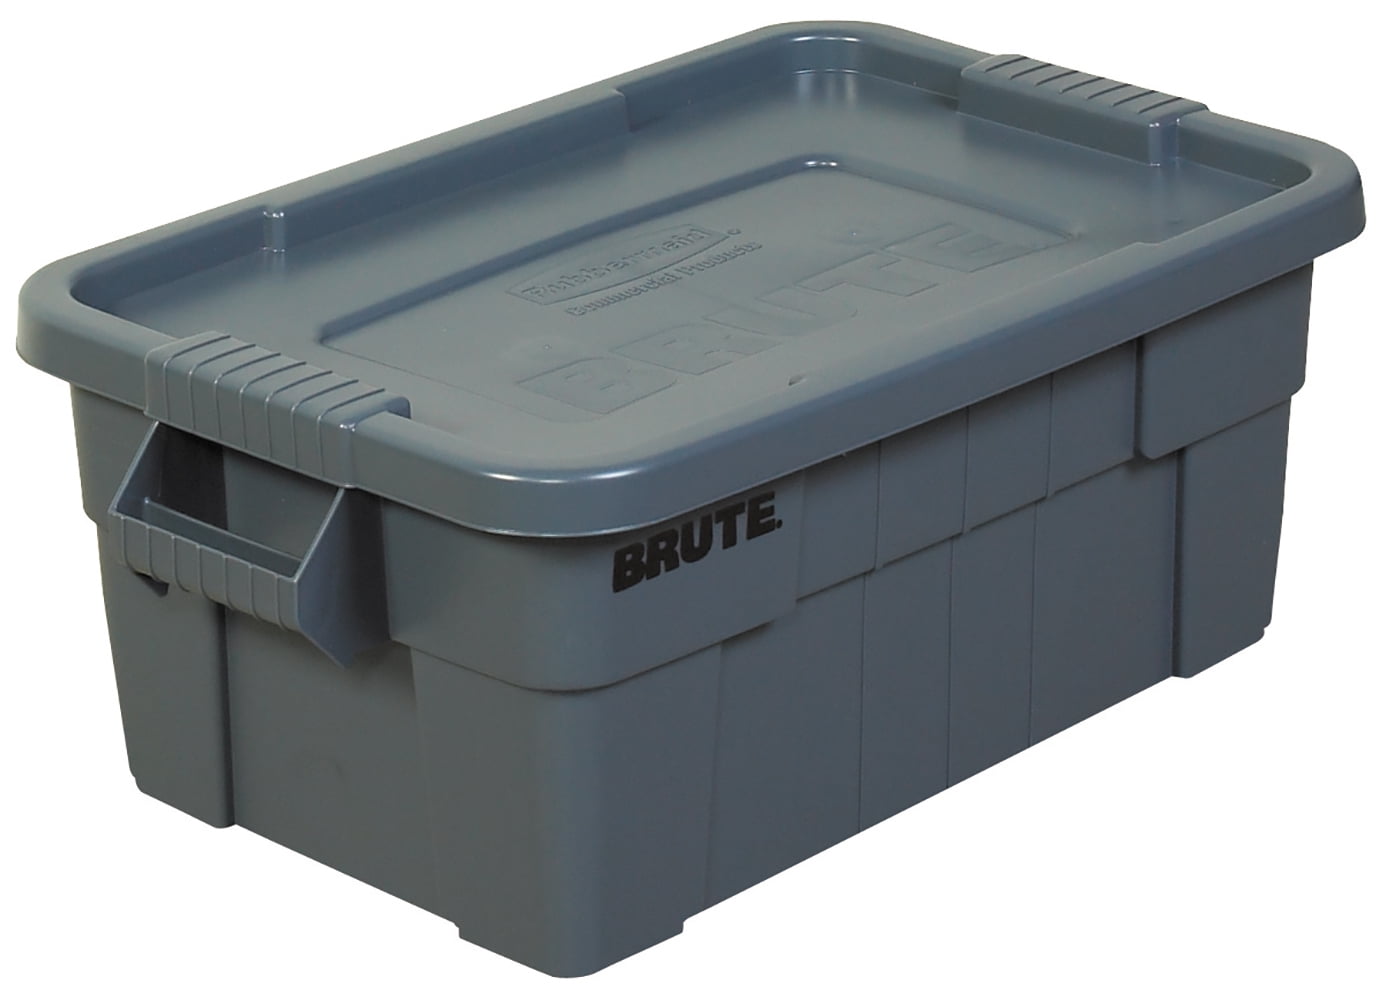 Rubbermaid 14 Gallon Brute Tote with Lid FG9S3000GRAY - 27-1/2 x 16-3/4 x  10-3/4 - Gray - Pkg Qty 6